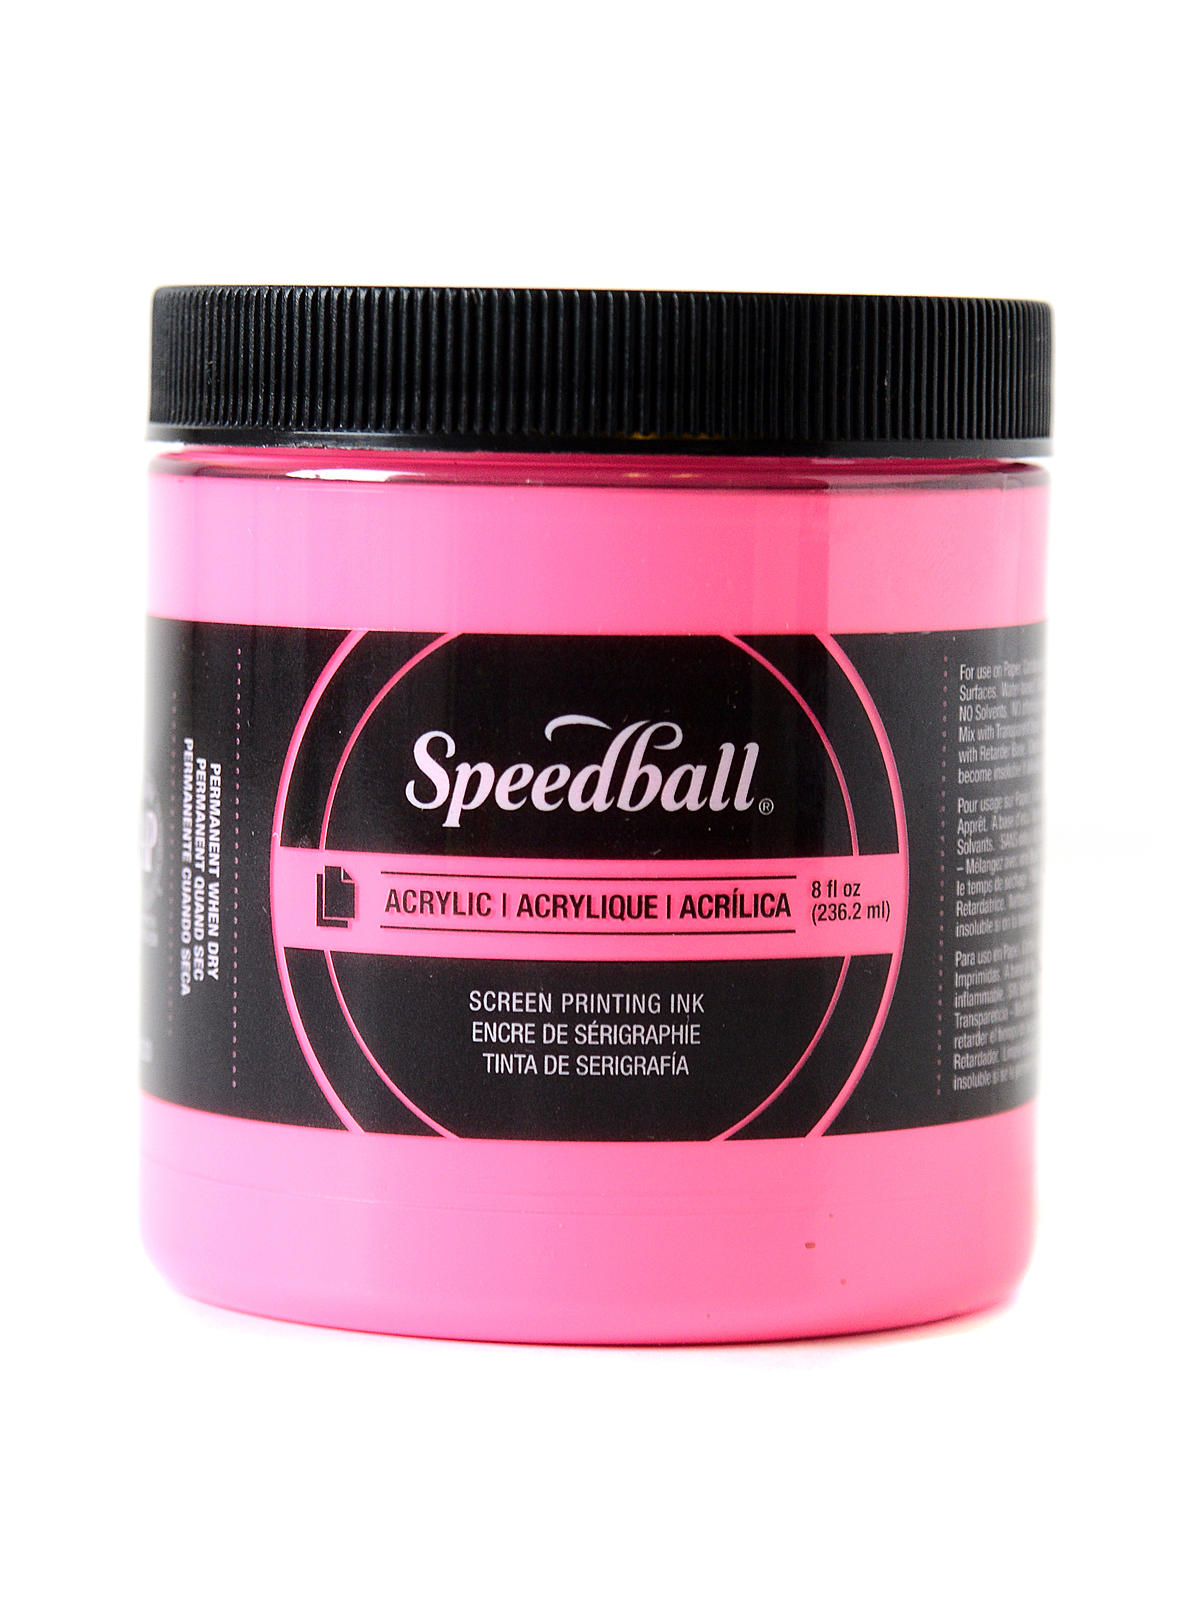 Acrylic Screen Printing Ink Fluorescent Hot Pink 8 Oz.